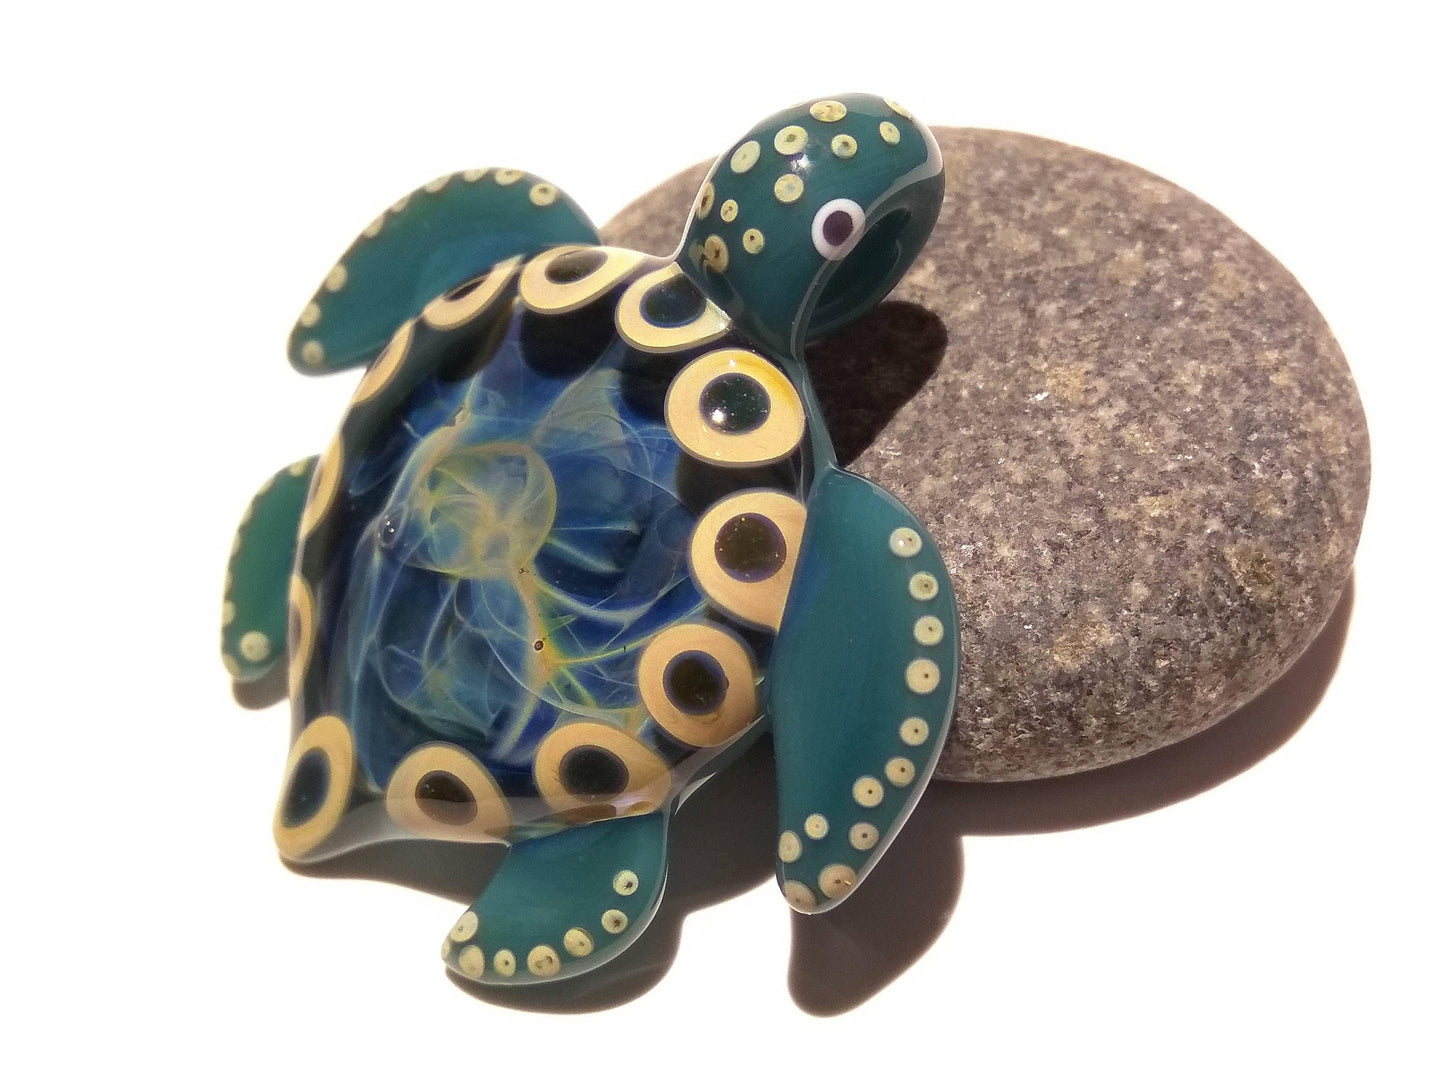 Glass Tribal Turtle Necklace, Blue Ocean Turtle, Handmade Glass Pendant, Glass Art Jewelry, Turtle Lover Collector, Cute Glass Sea Life Gift